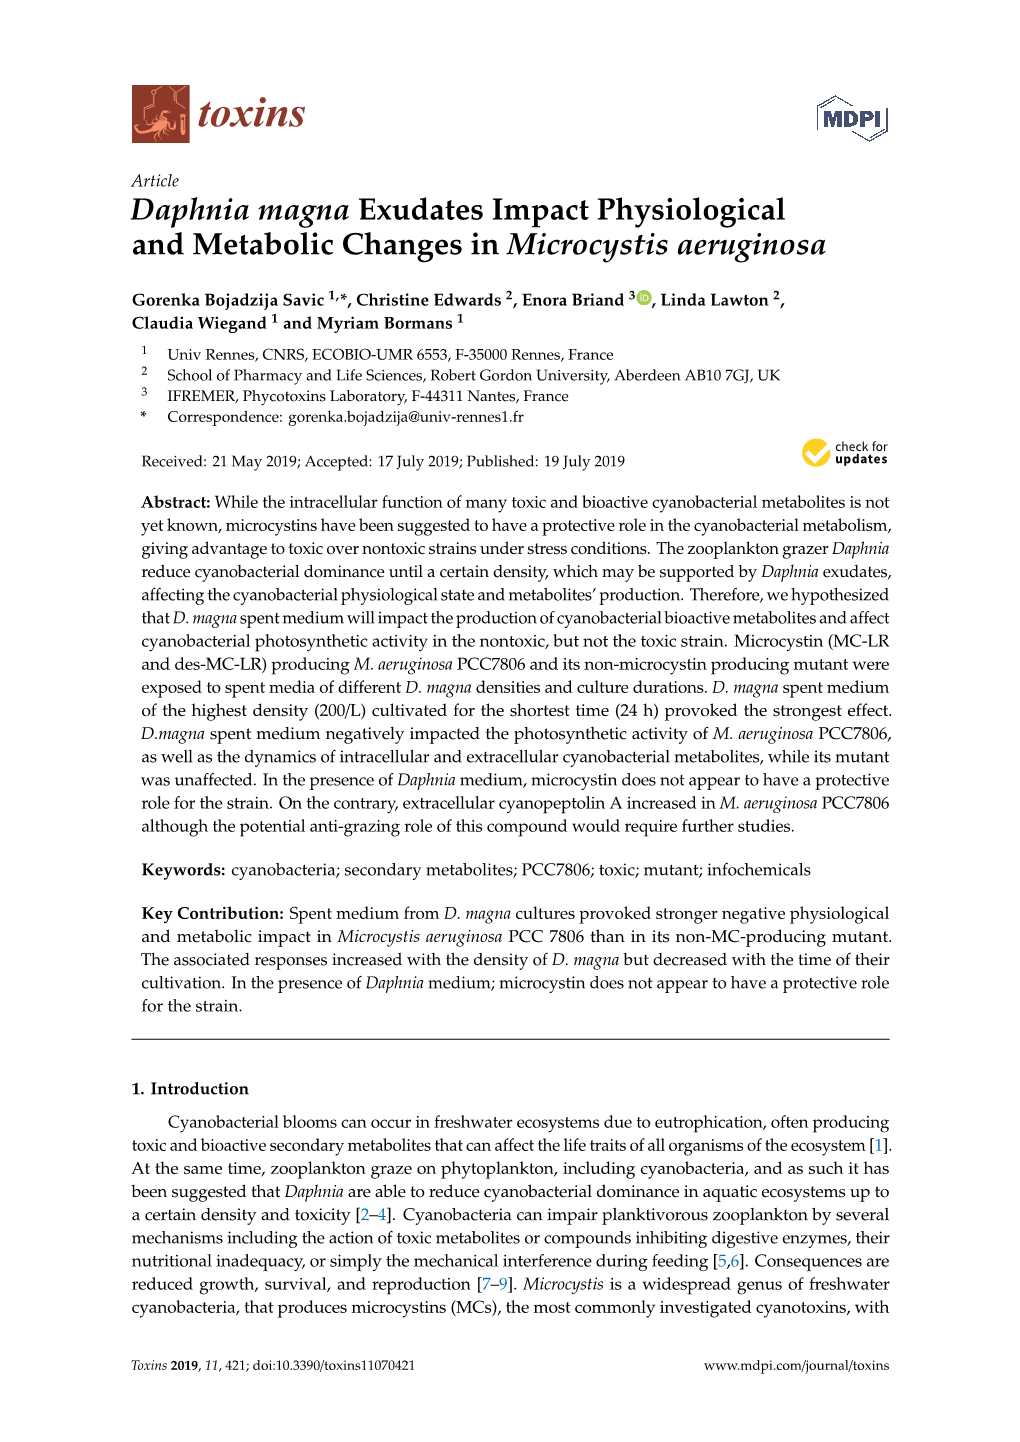 Daphnia Magna Exudates Impact Physiological and Metabolic Changes in Microcystis Aeruginosa